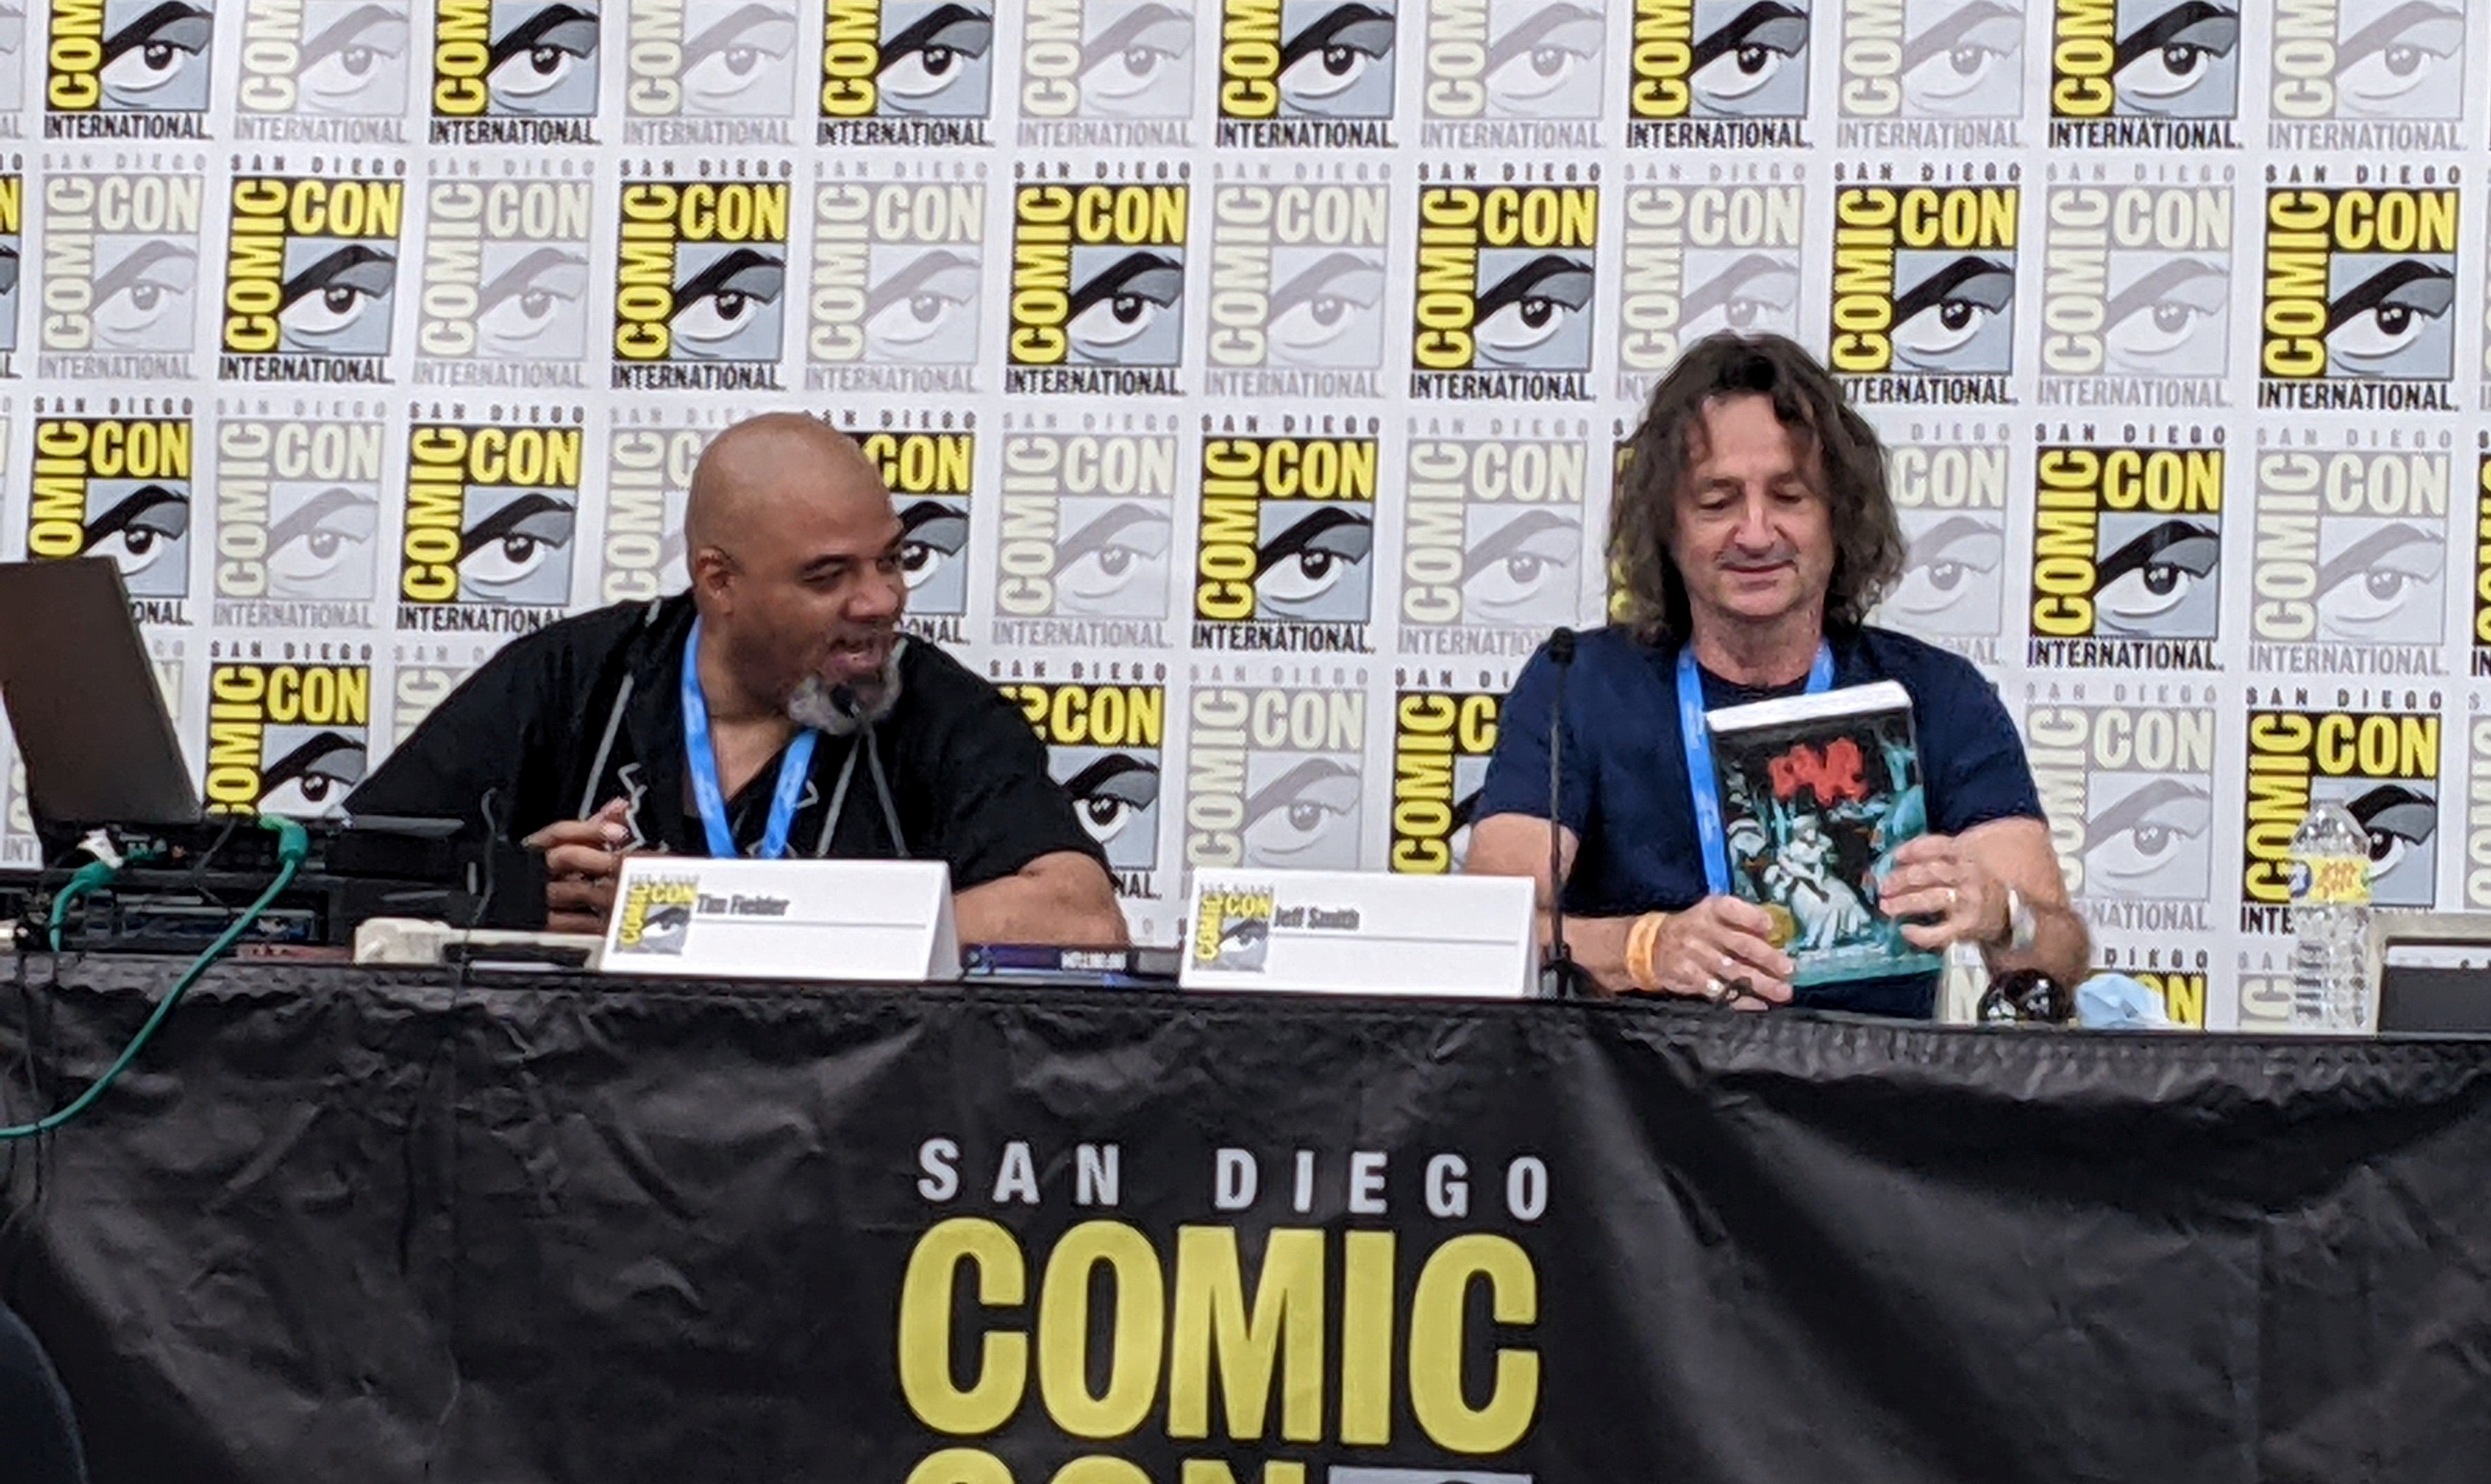 Tim Fielder and Jeff Smith sit at panel in front of SDCC banner